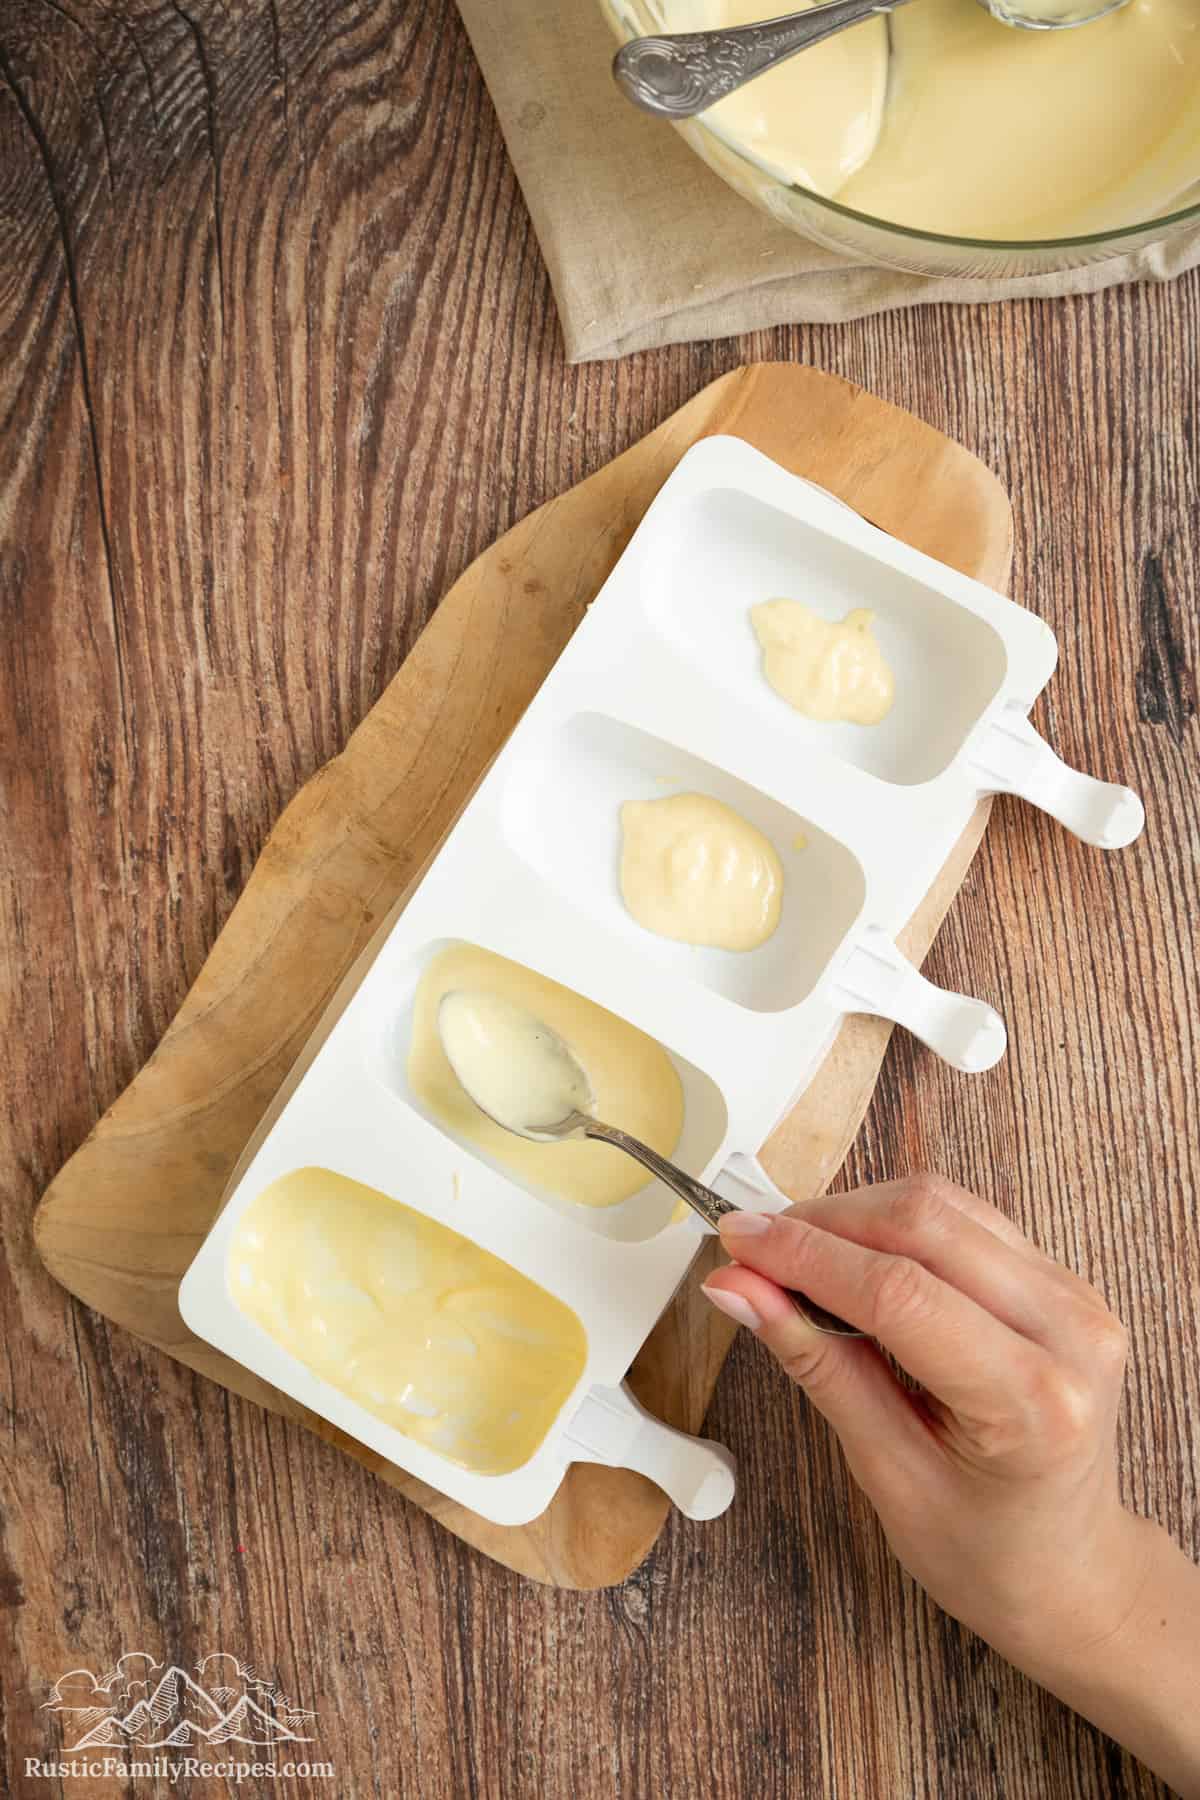 Melted white chocolate is added into the cakesicle molds.